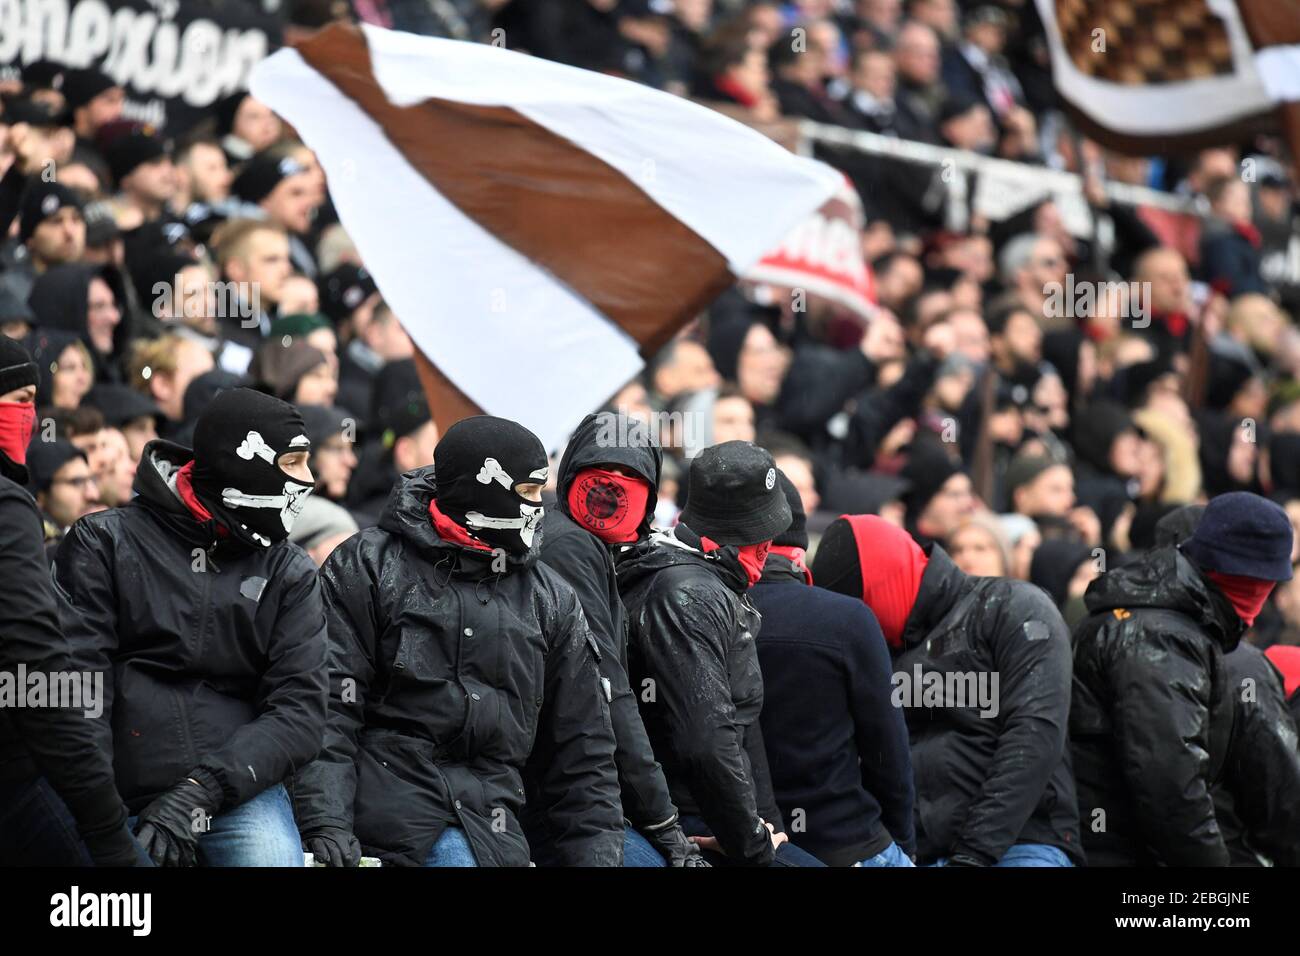 St Pauli Stadion High Resolution Stock Photography and Images - Alamy